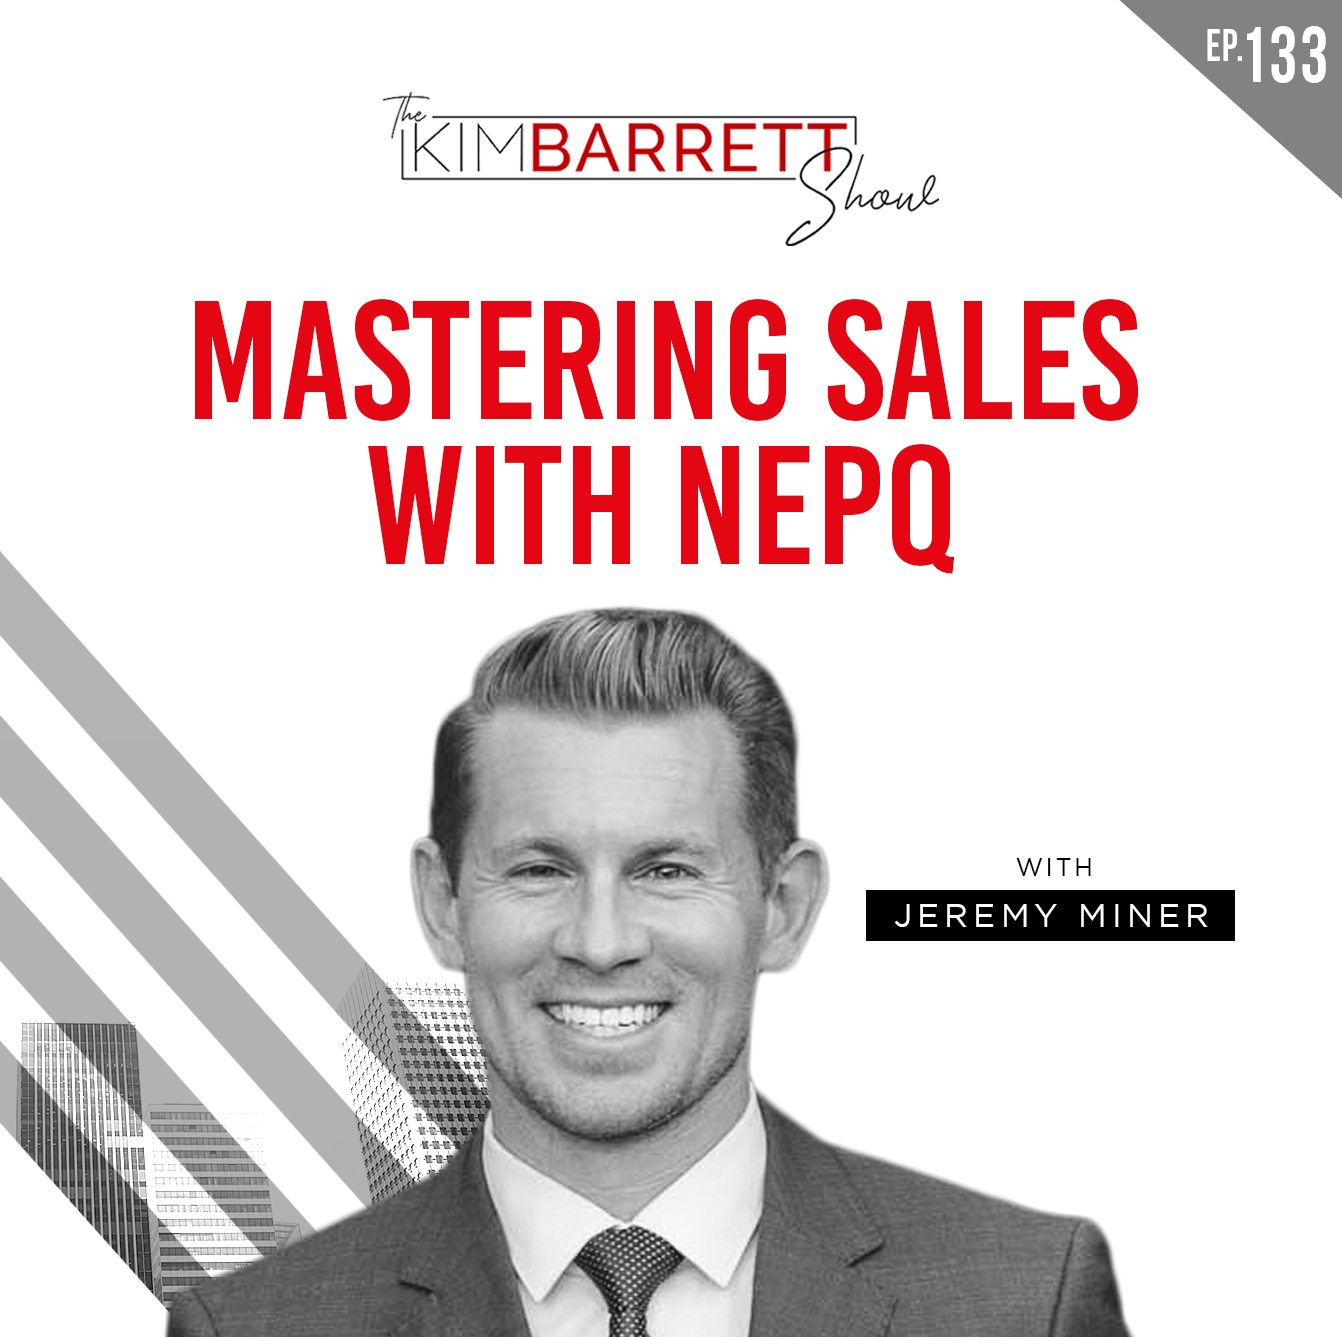 Mastering Sales With NEPQ With Jeremy Miner